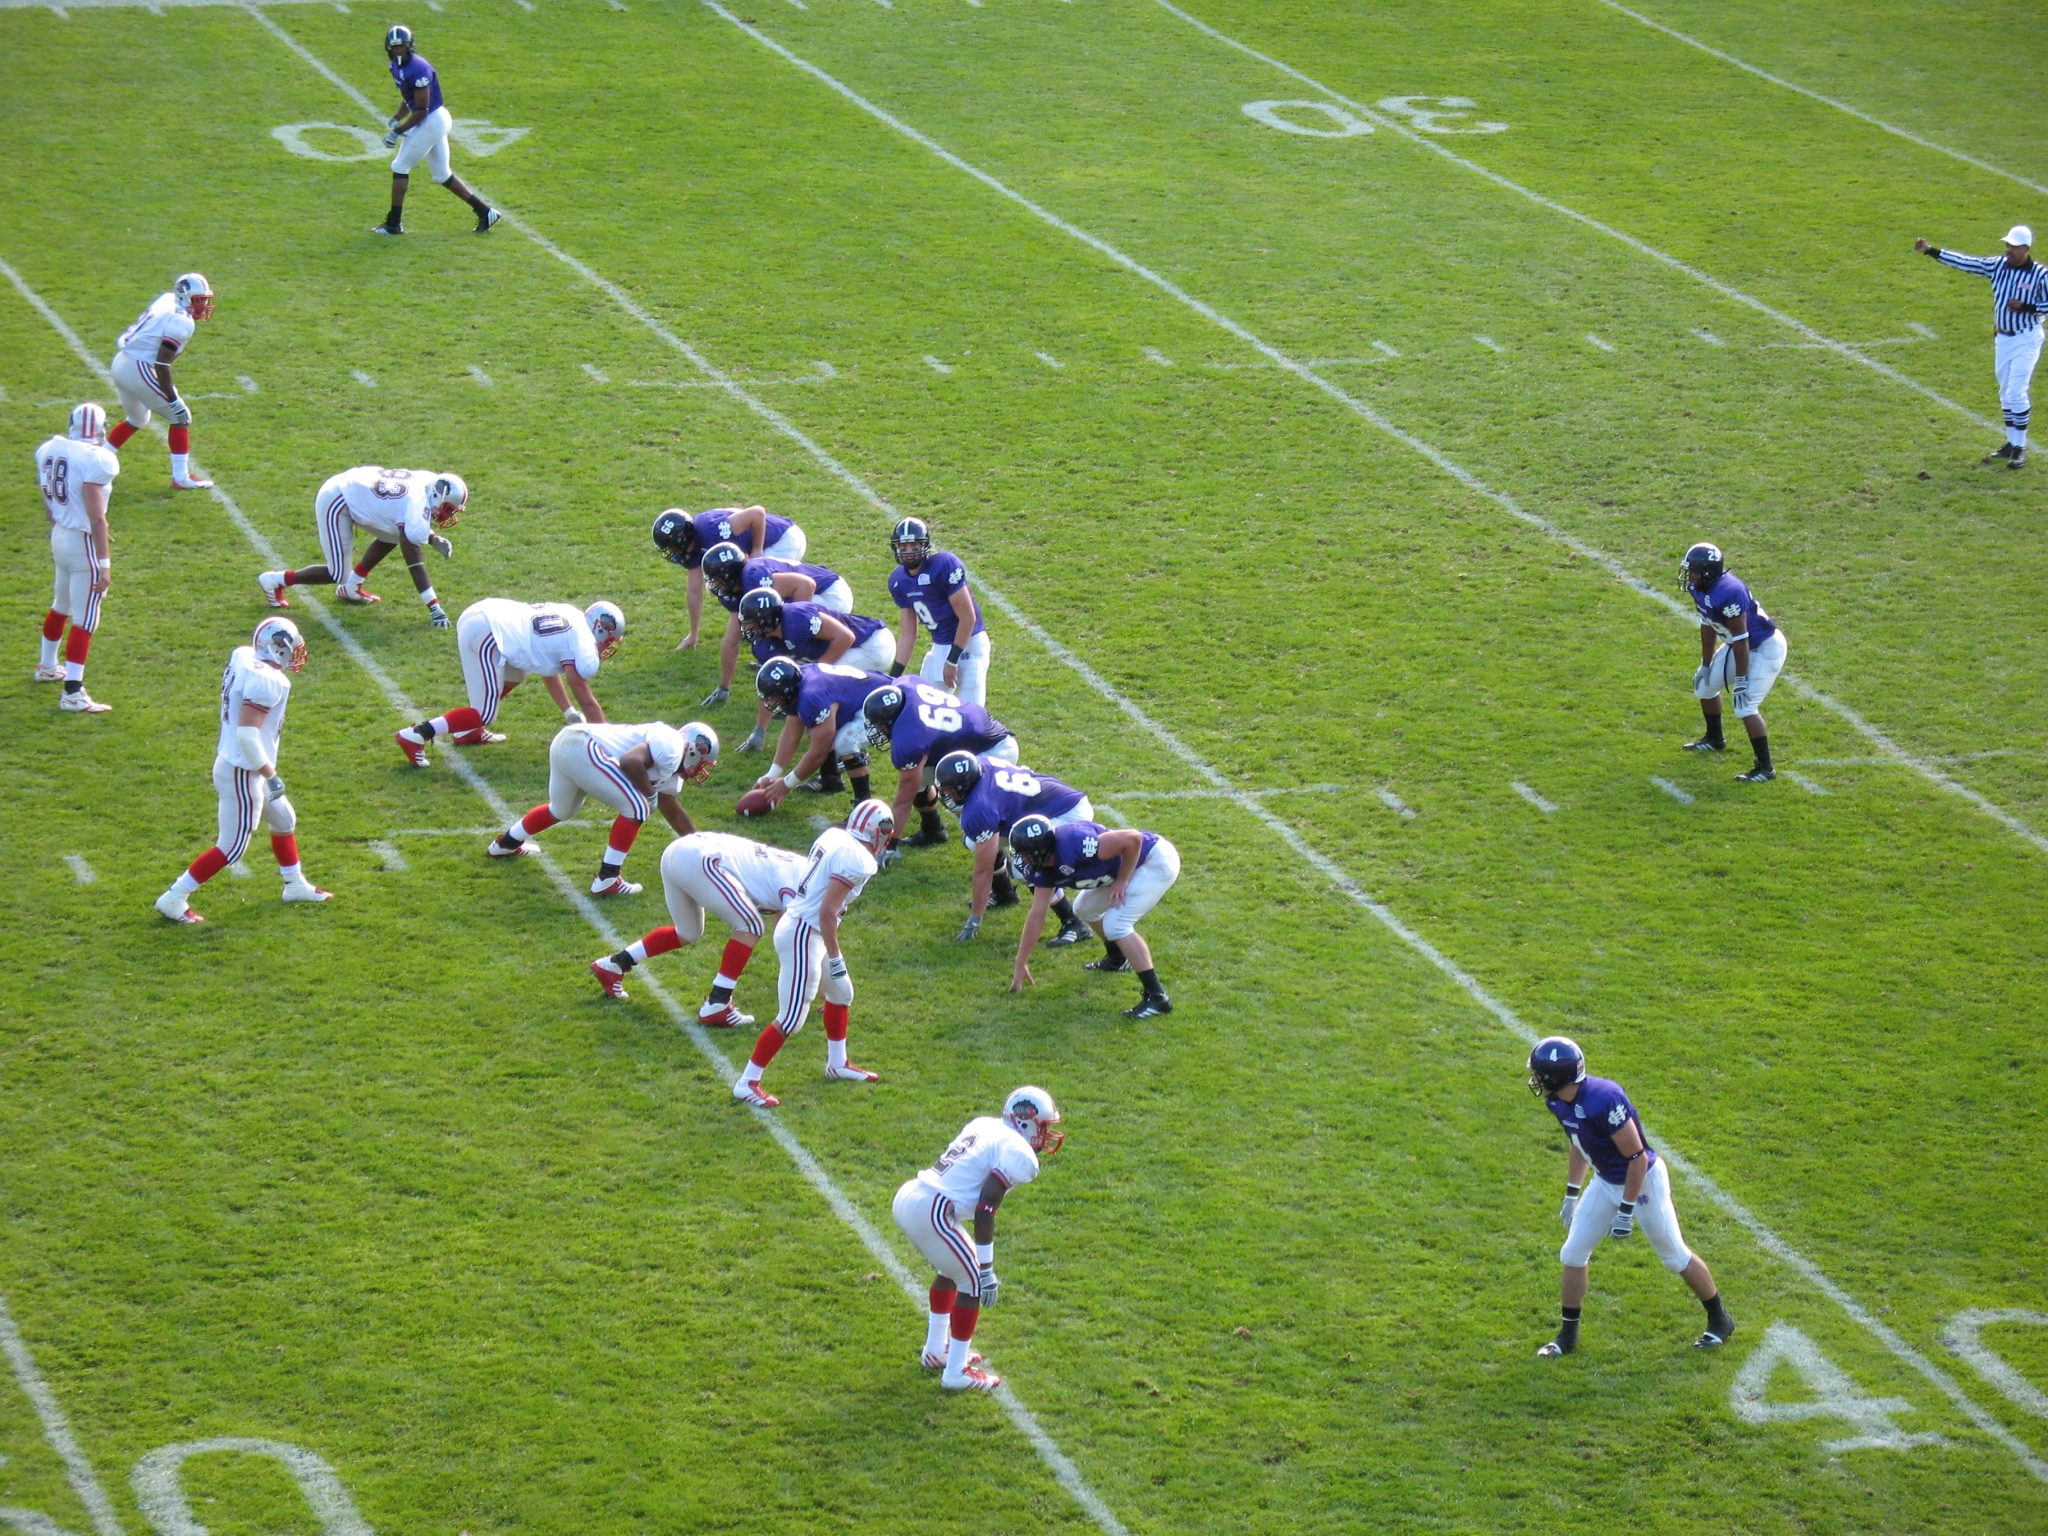 Players assemble at the line of scrimmage in an American football game.